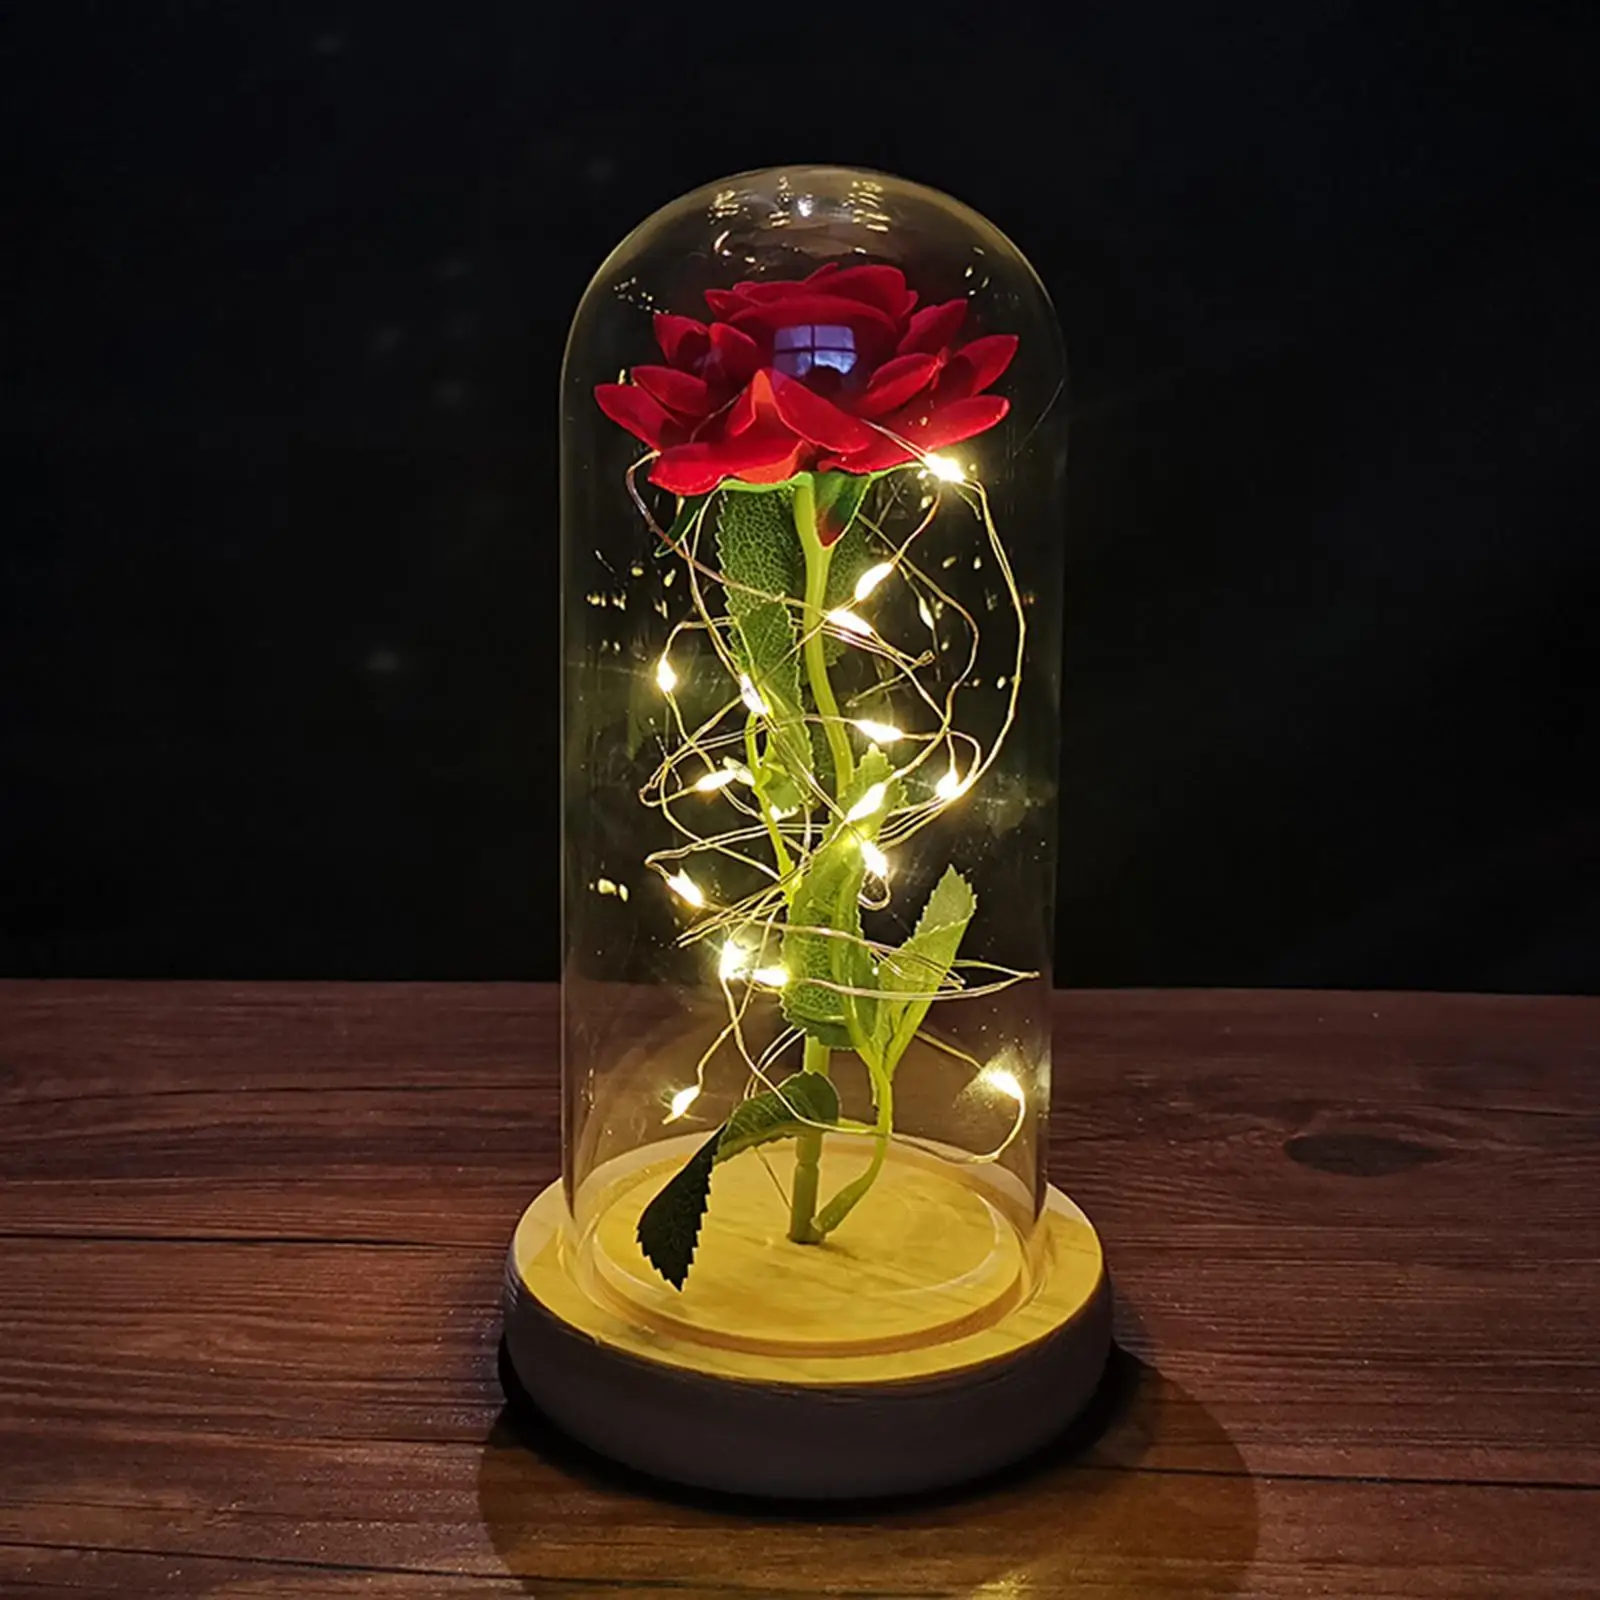 Valentines Eternal Flower Rose Glass Artificial Flower Glass Cover Romantic Creative Preserved Red Roses Immortal for Girls Gift